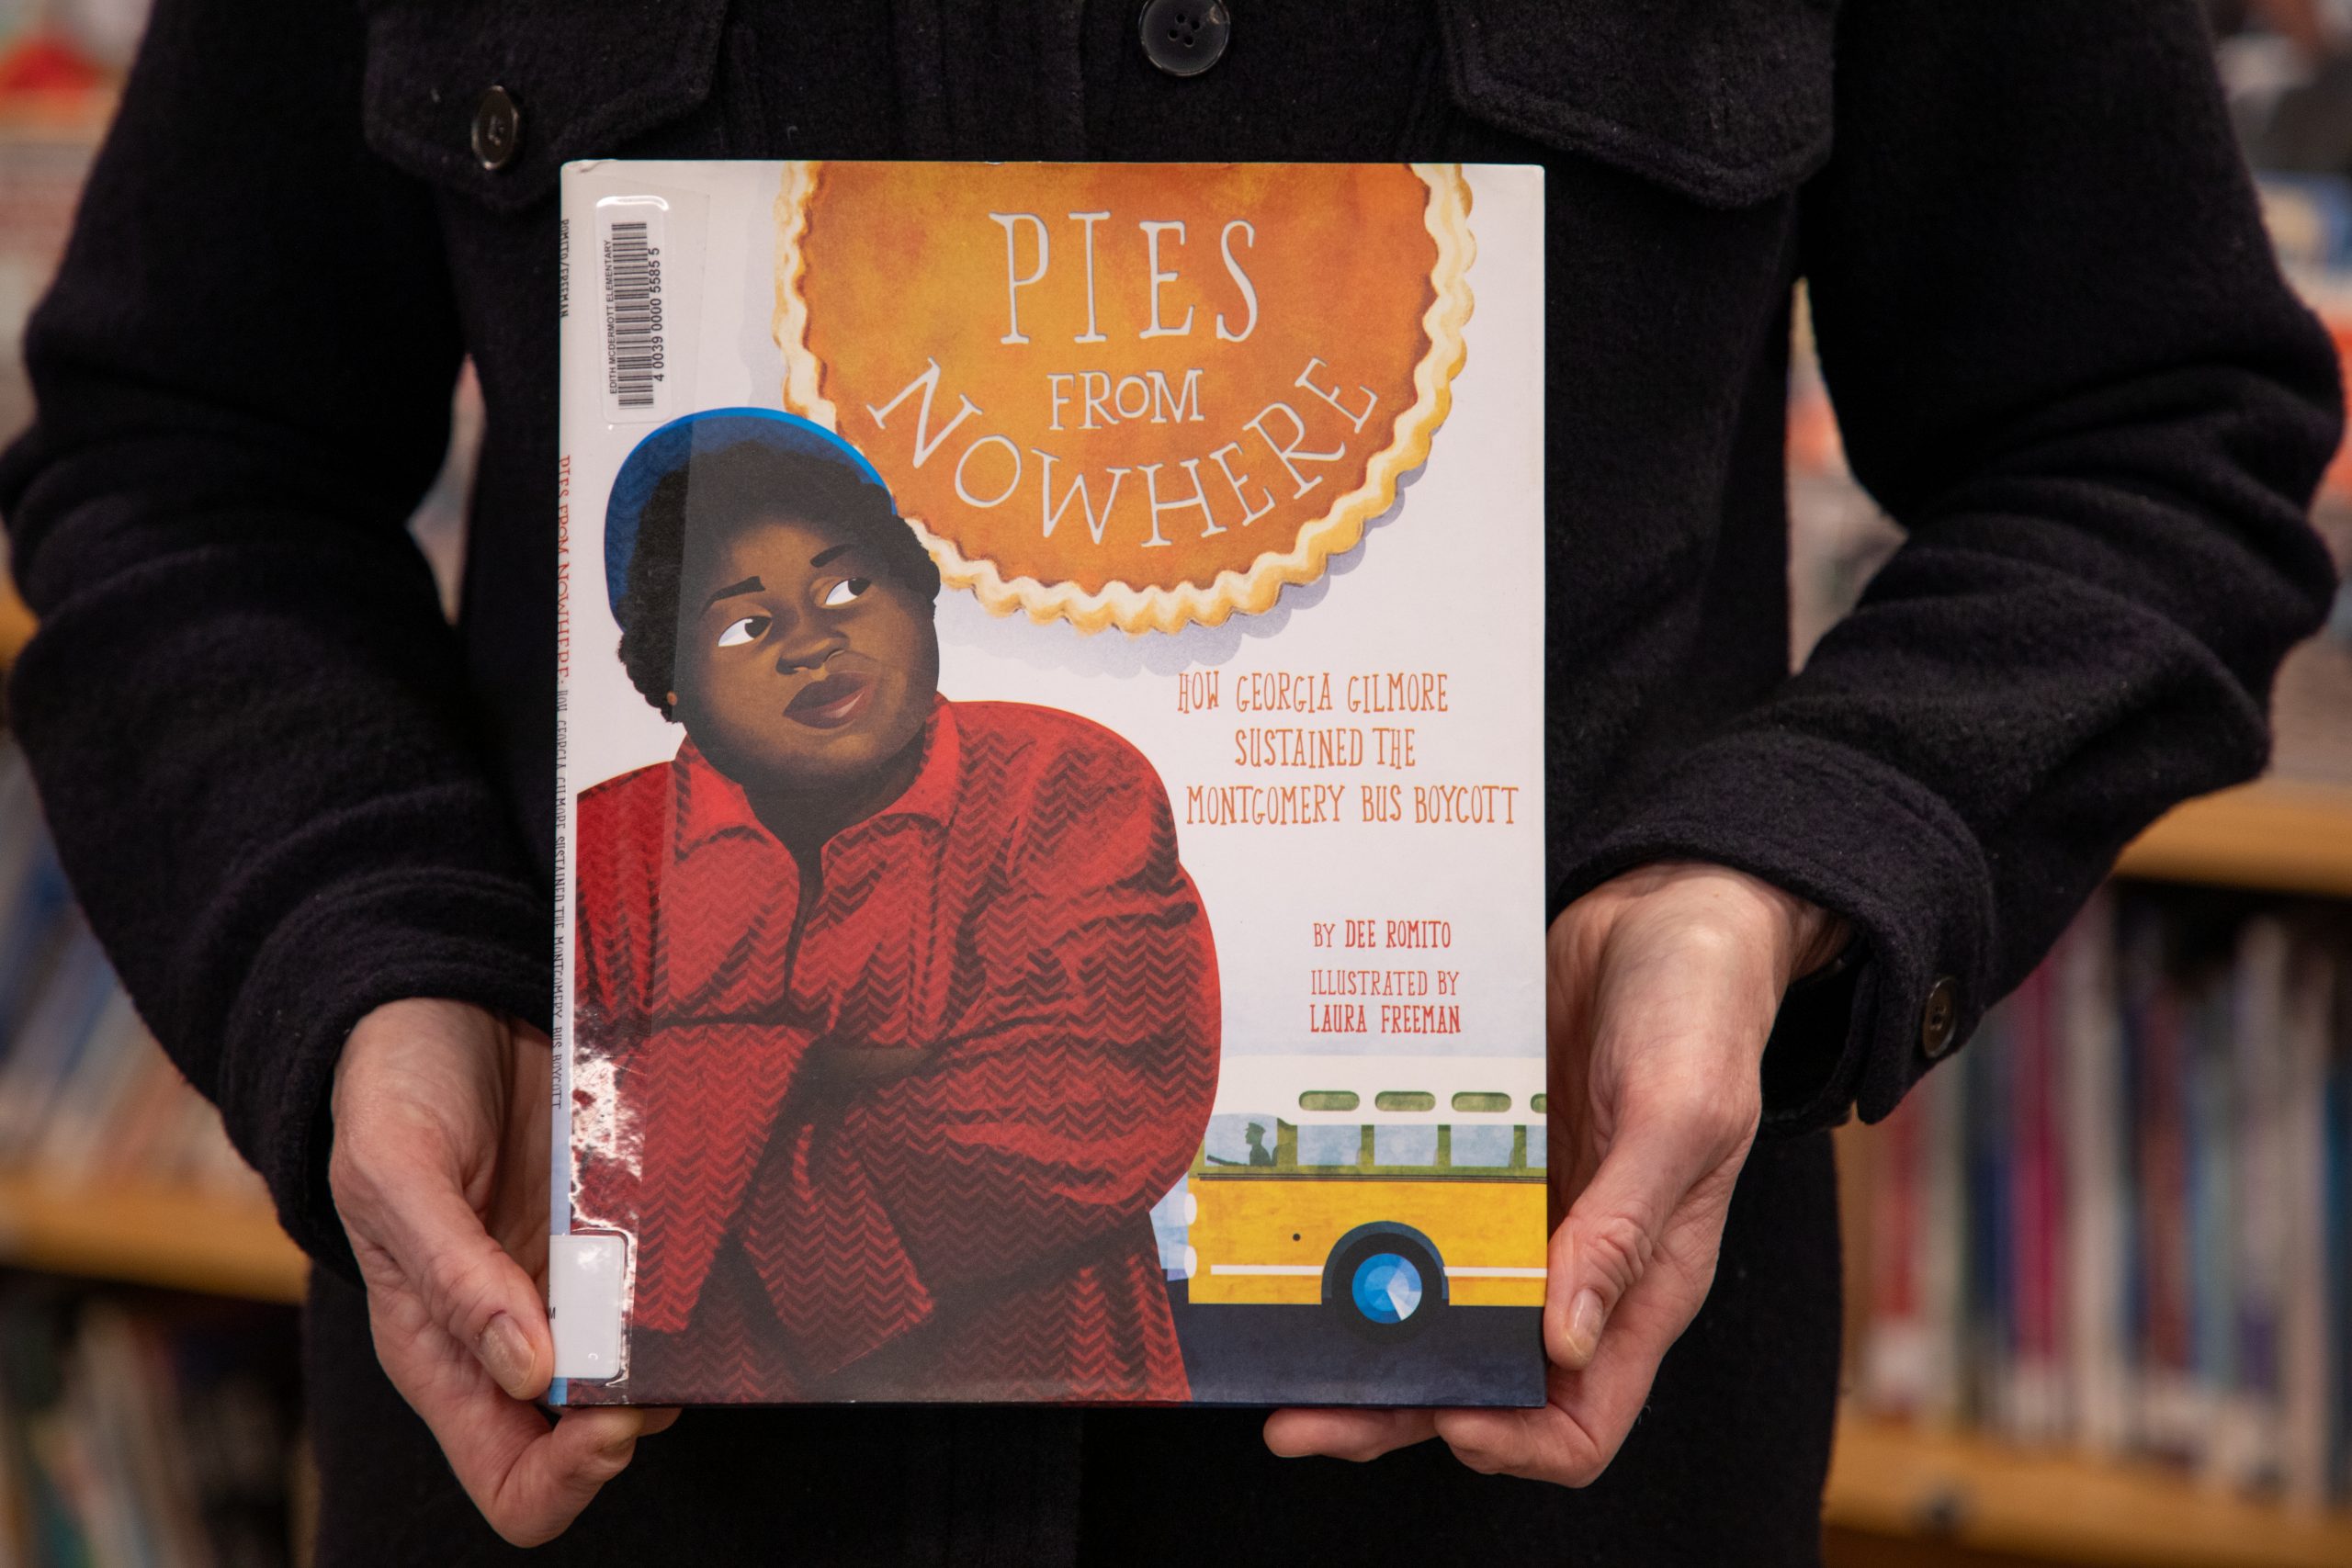 Book cover of "Pies from Nowhere: How Georgia Gilmore Sustained the Montgomery Bus Boycott" by Dee Romito.